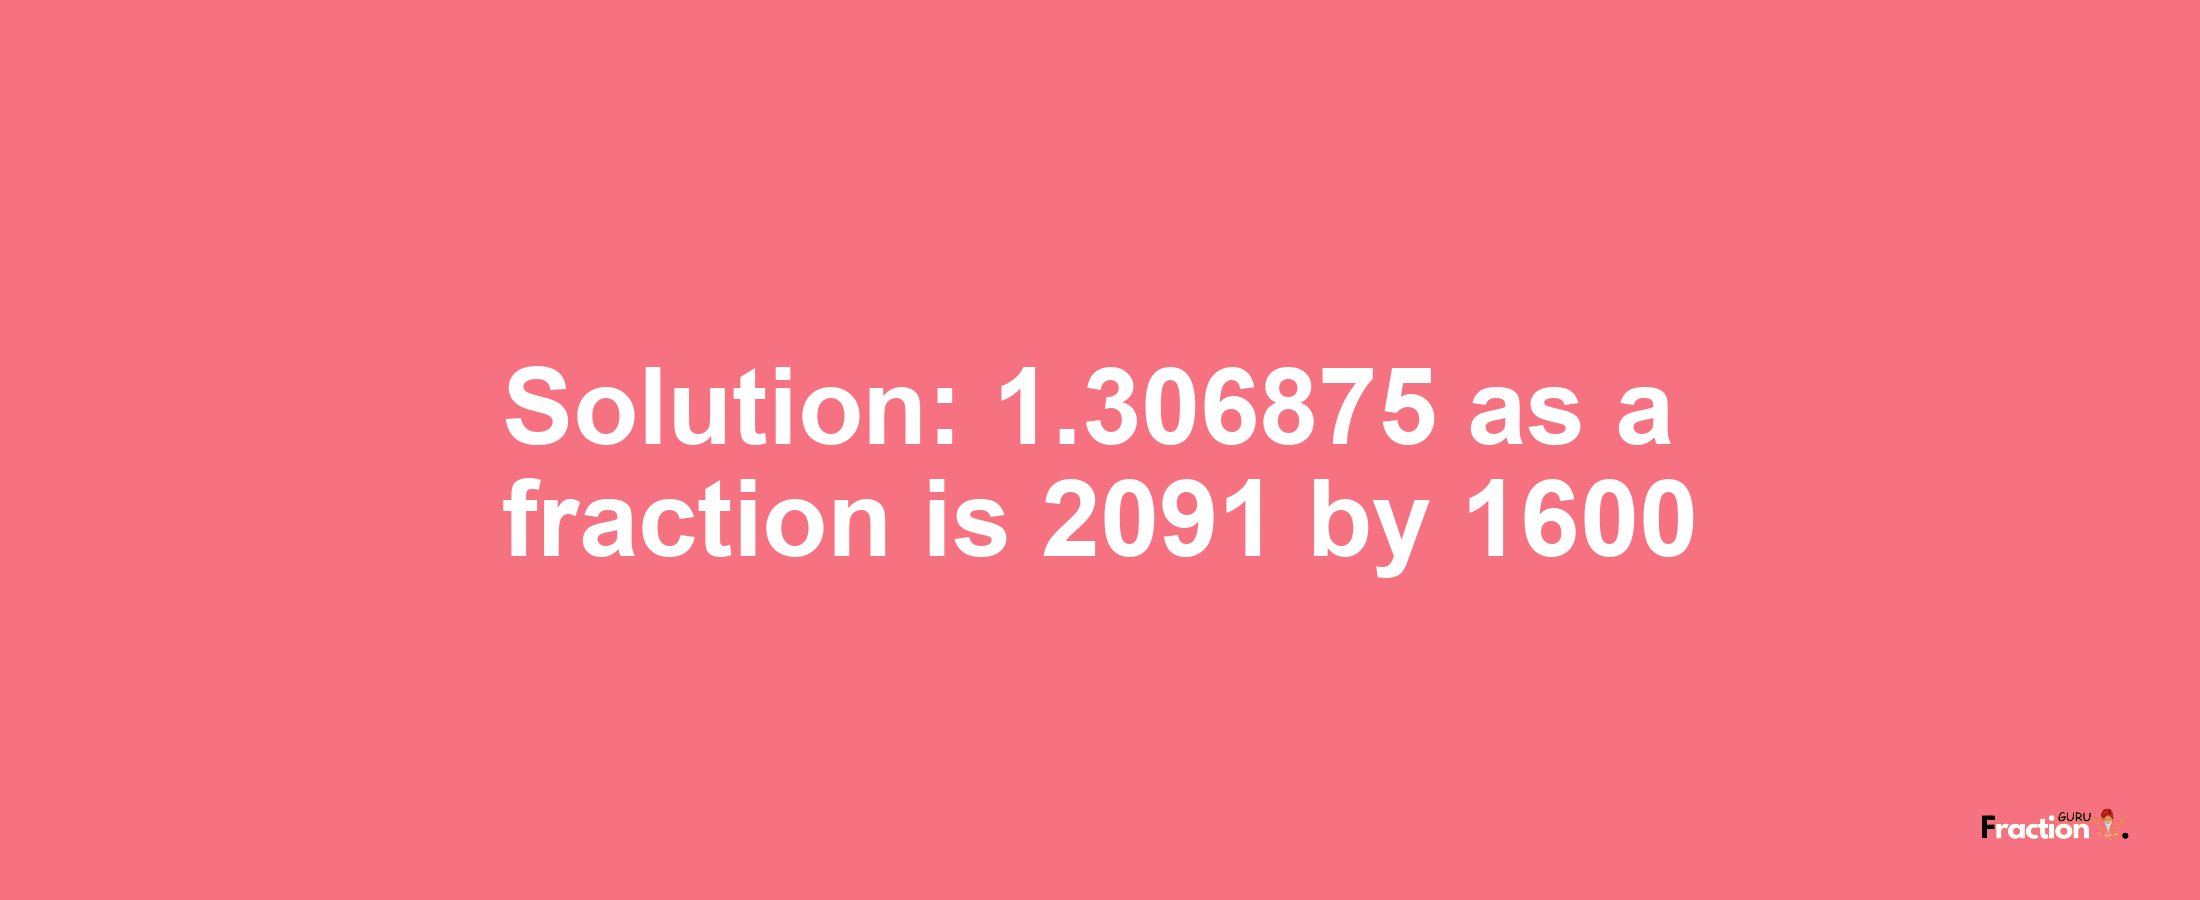 Solution:1.306875 as a fraction is 2091/1600